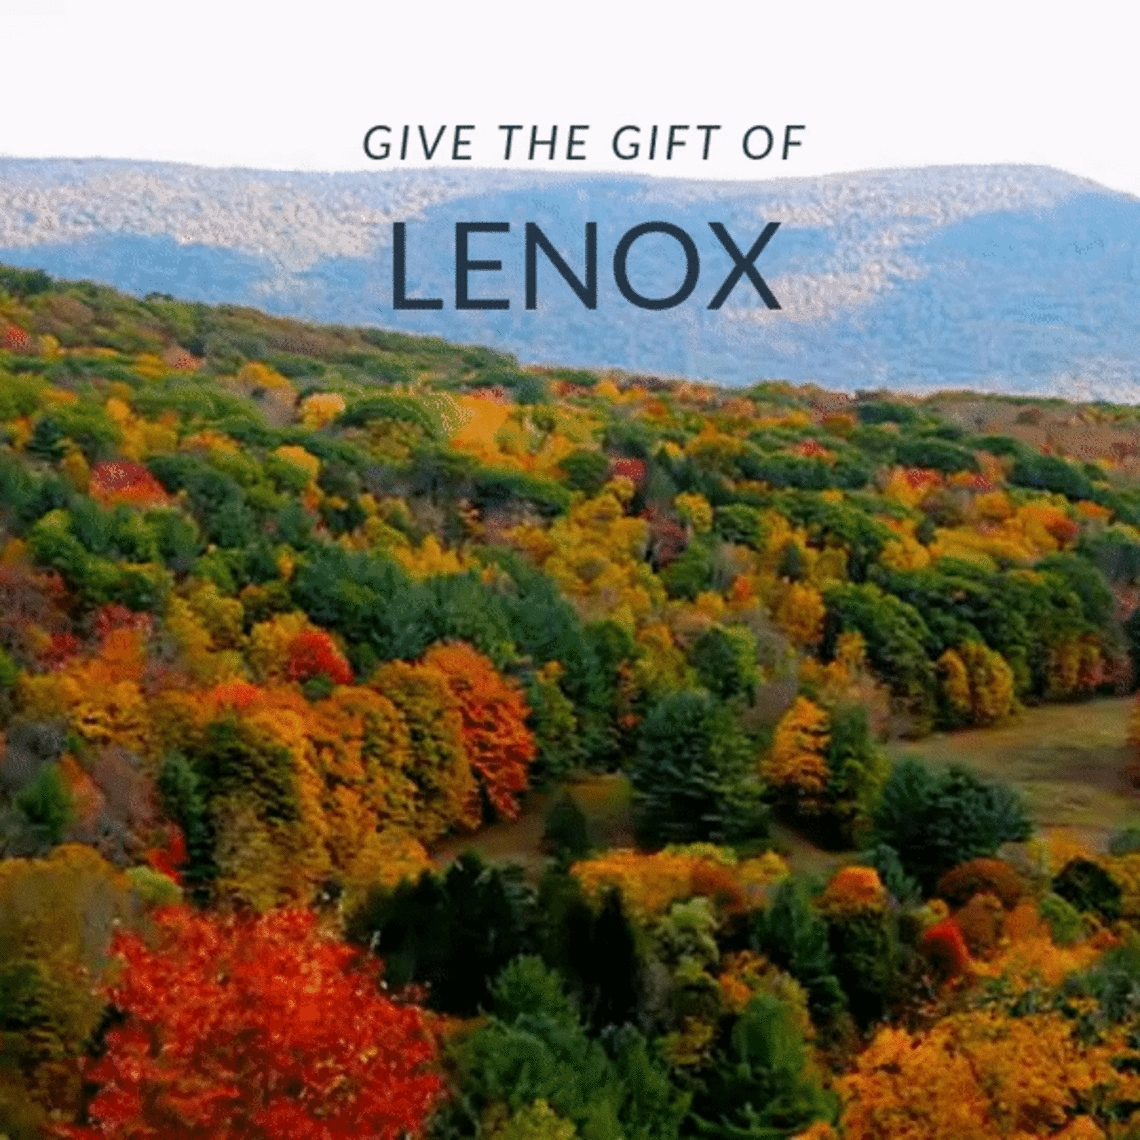 Give the gift of Lenox. Video of soaring over fall colored trees. 